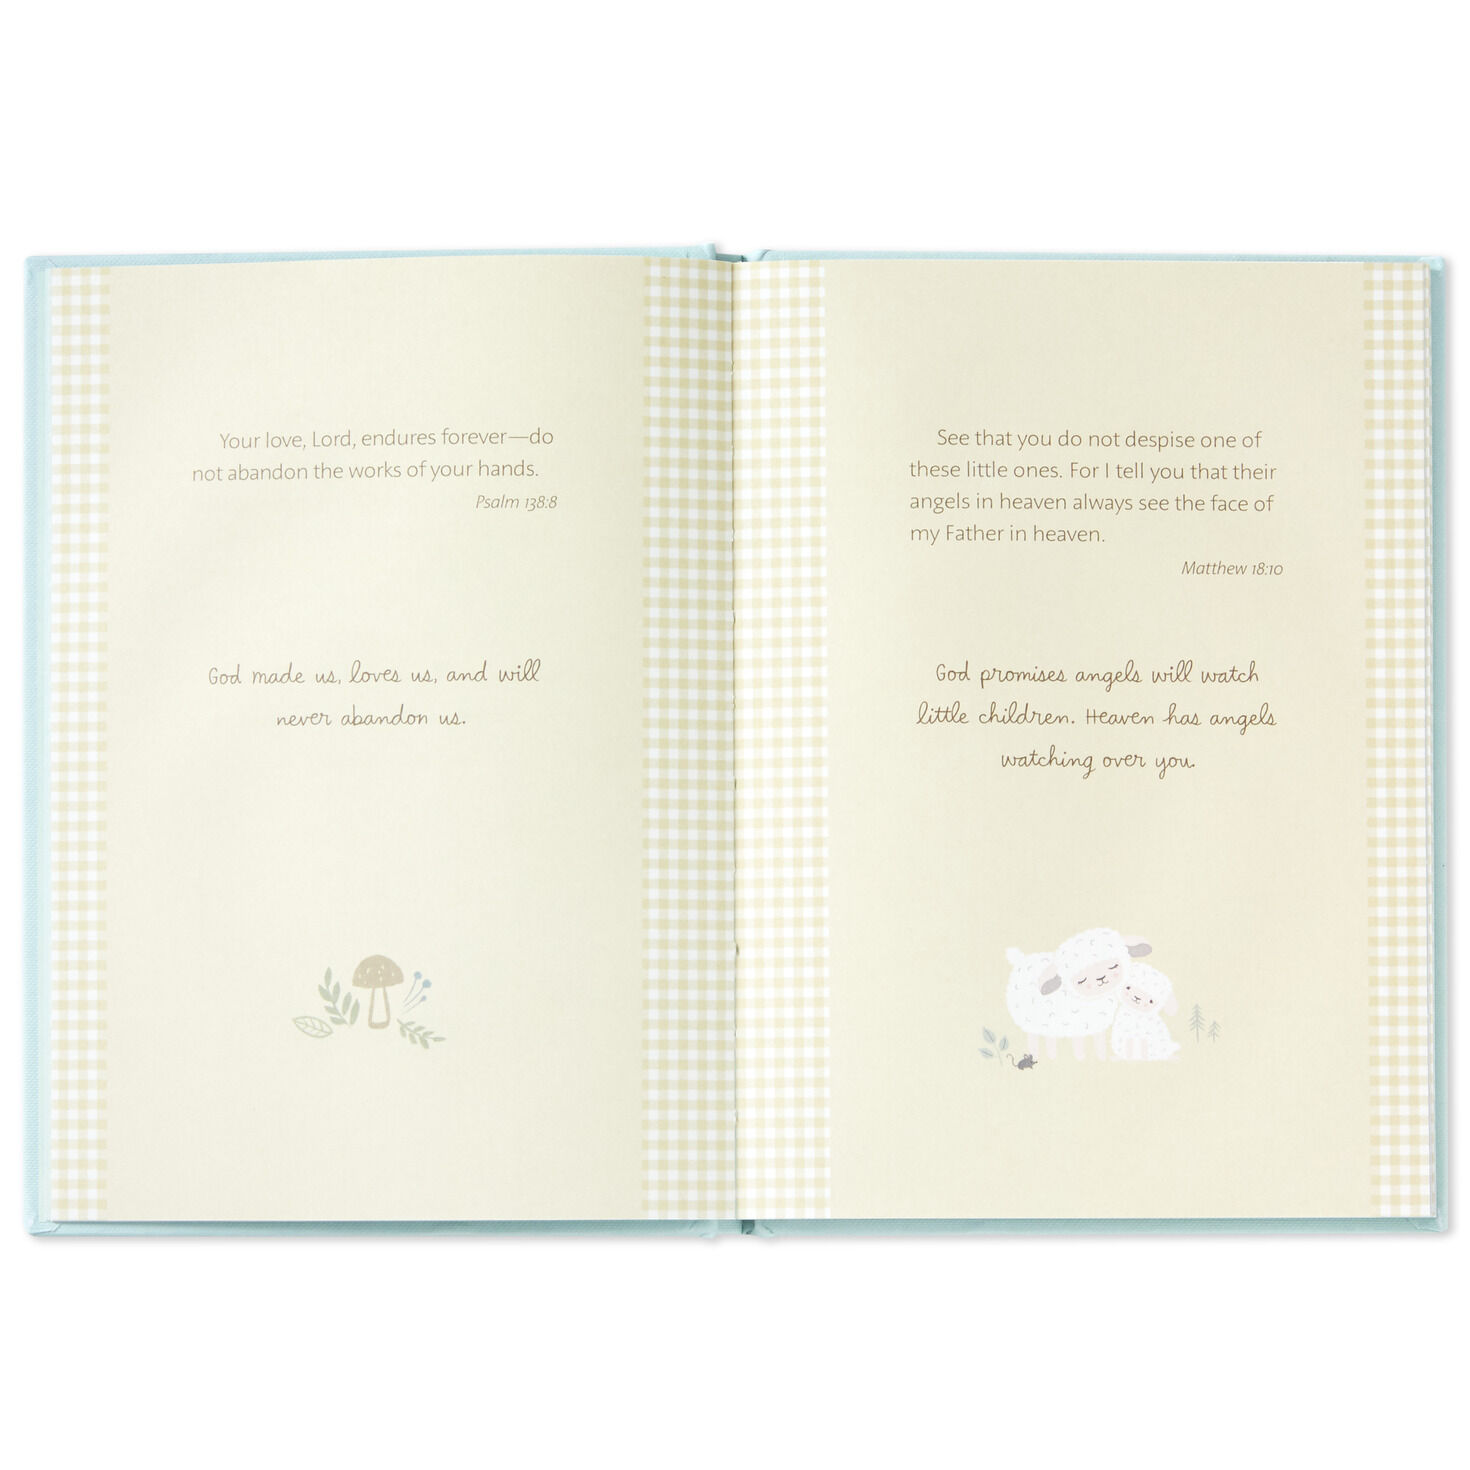 Bible Blessings for Your Baby Boy Book for only USD 12.99 | Hallmark